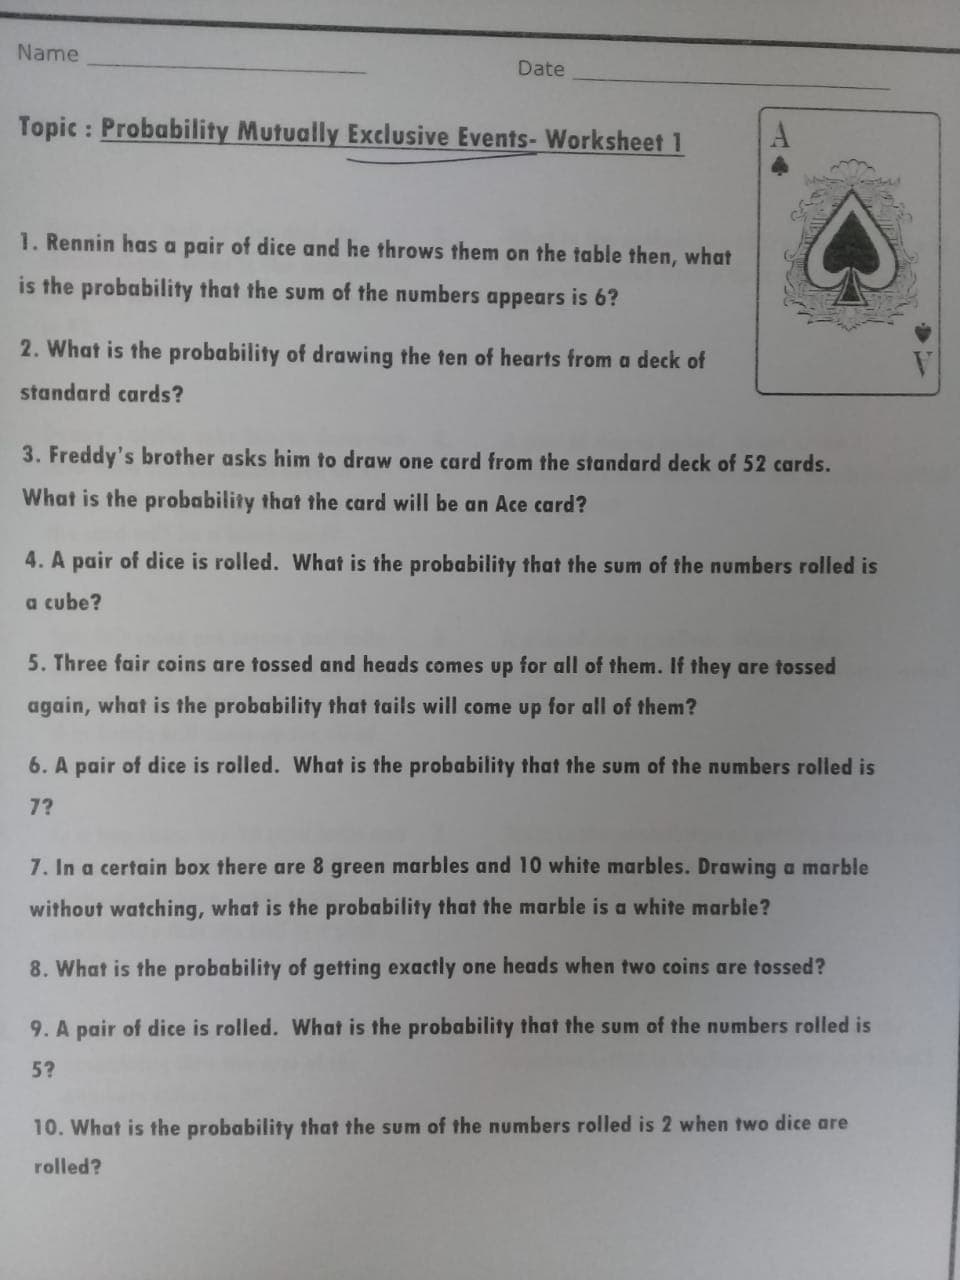 9. A pair of dice is rolled. What is the probability that the sum of the numbers rolled is
5?
10. What is the probability that the sum of the numbers rolled is 2 when two dice are
rolled?
